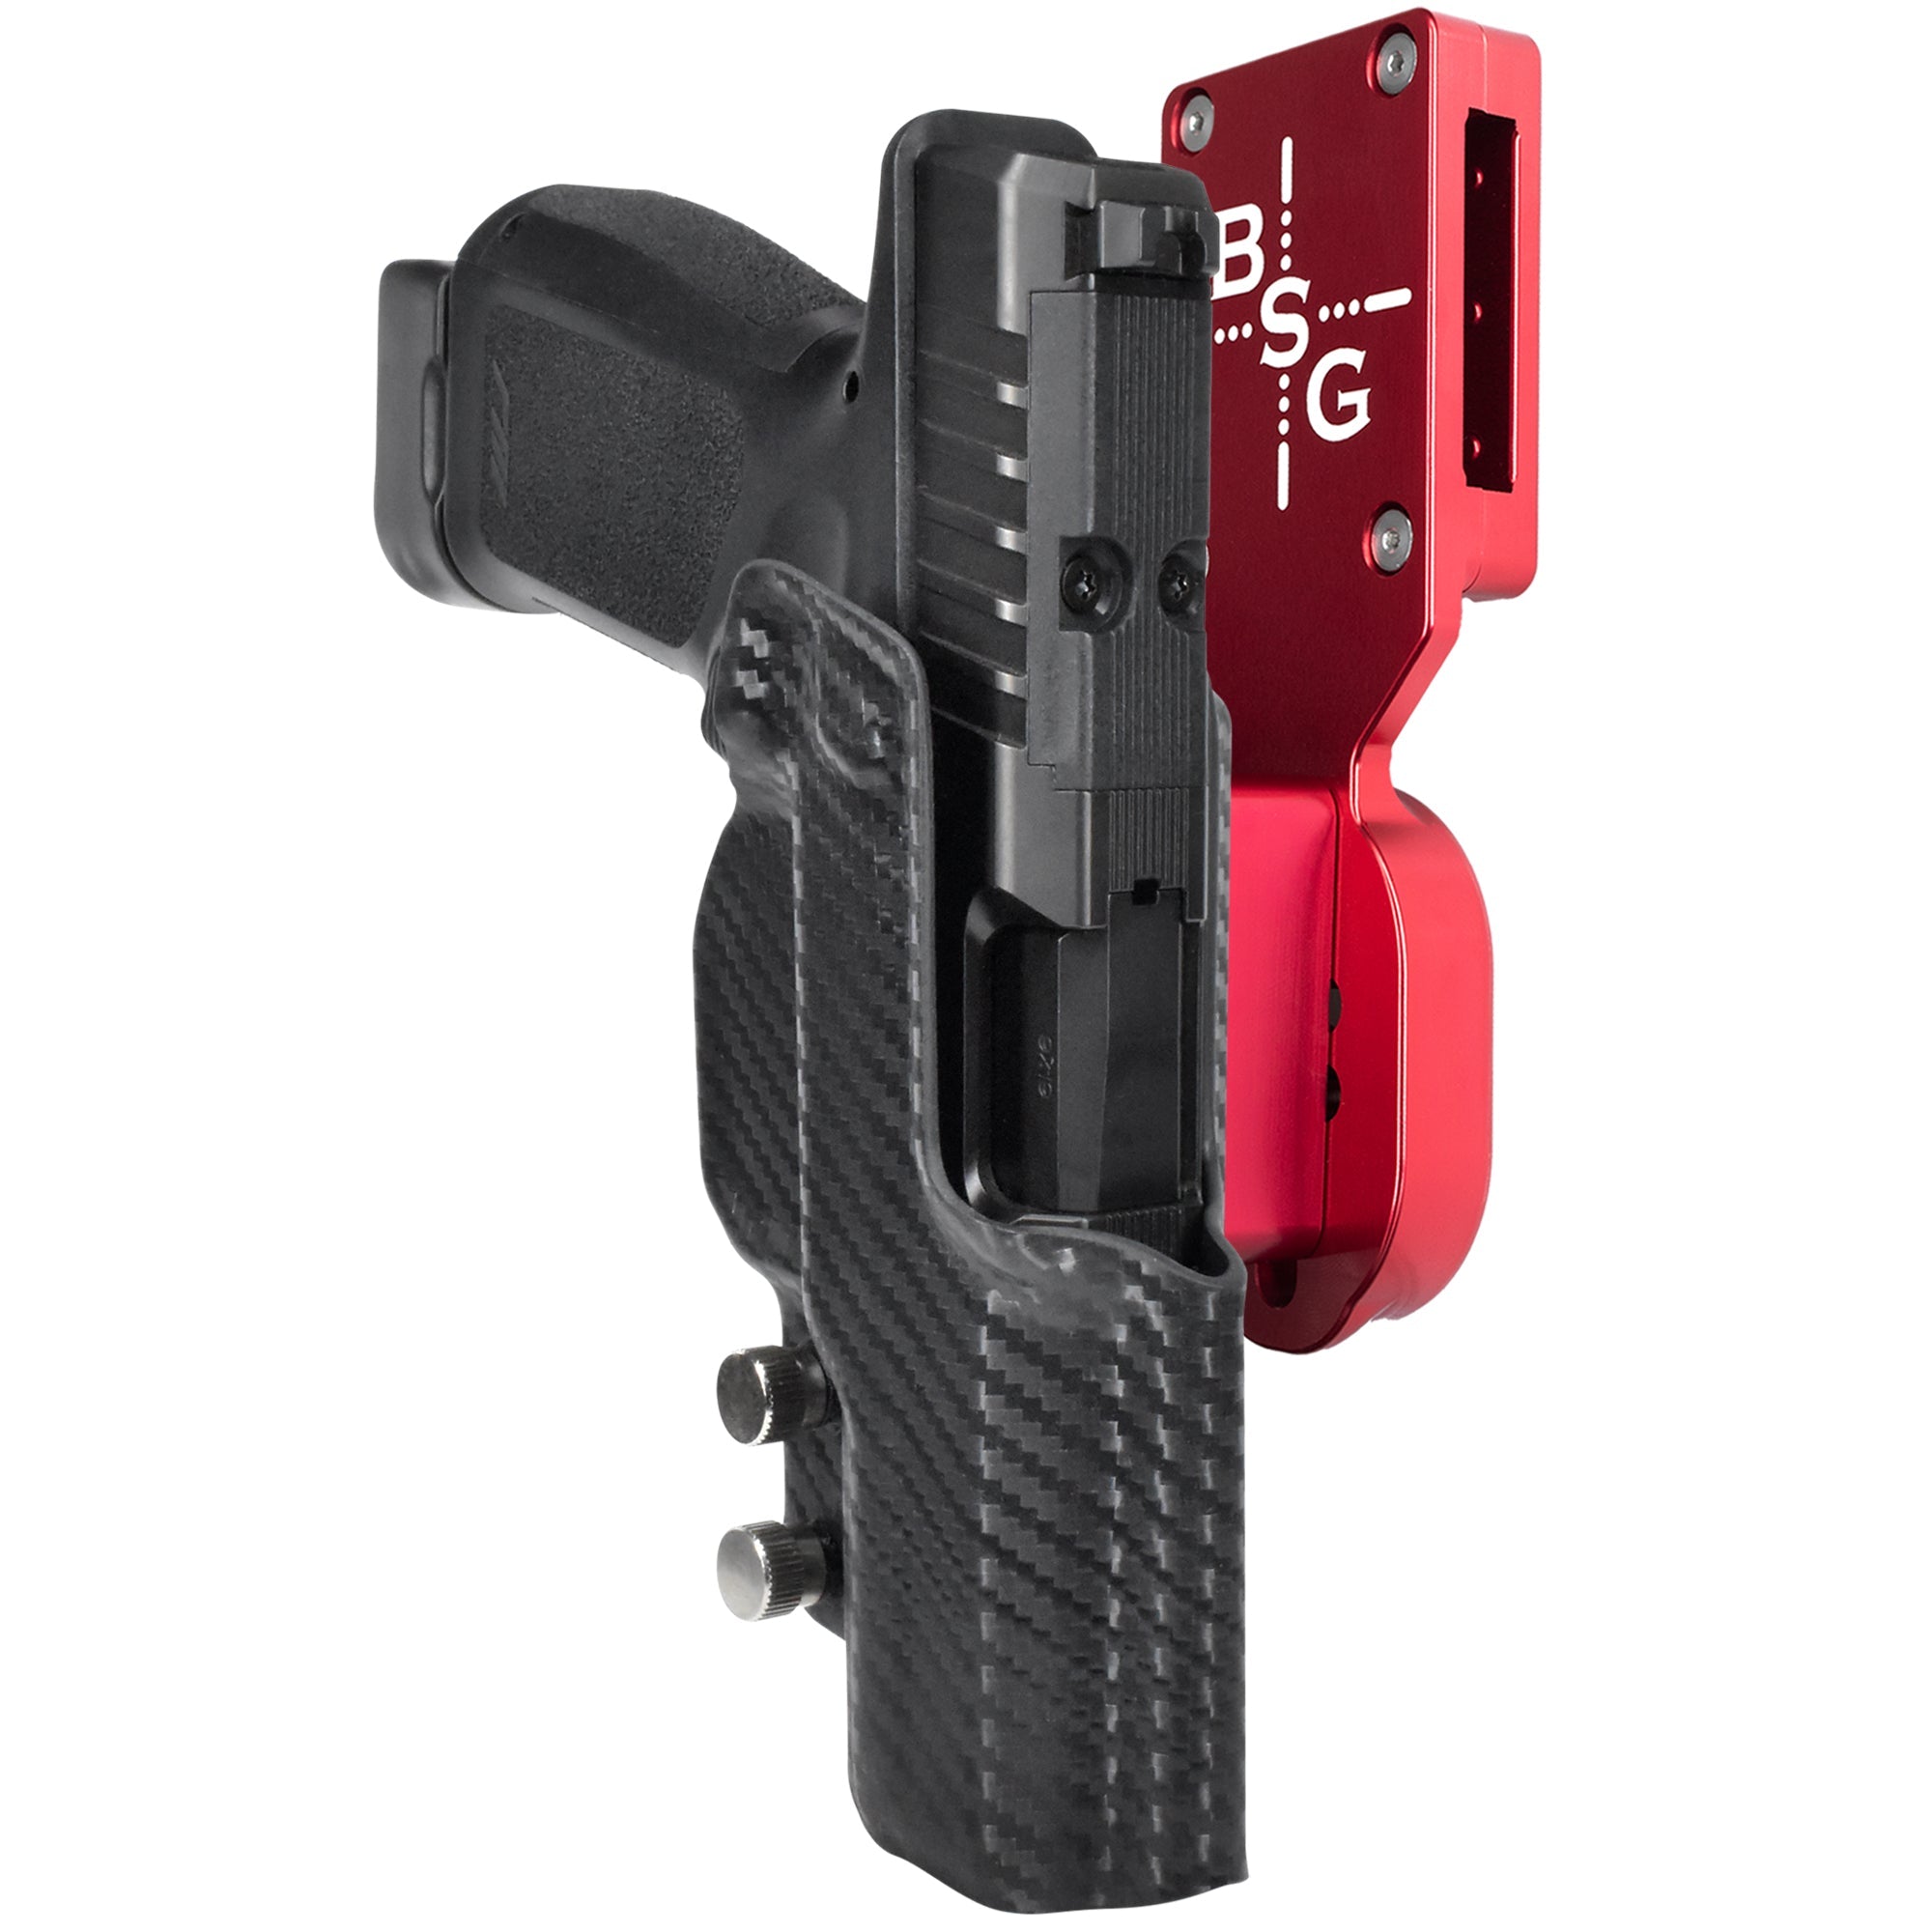 Rost Martin RM1C Pro Heavy Duty Competition Holster in Red / Carbon Fiber